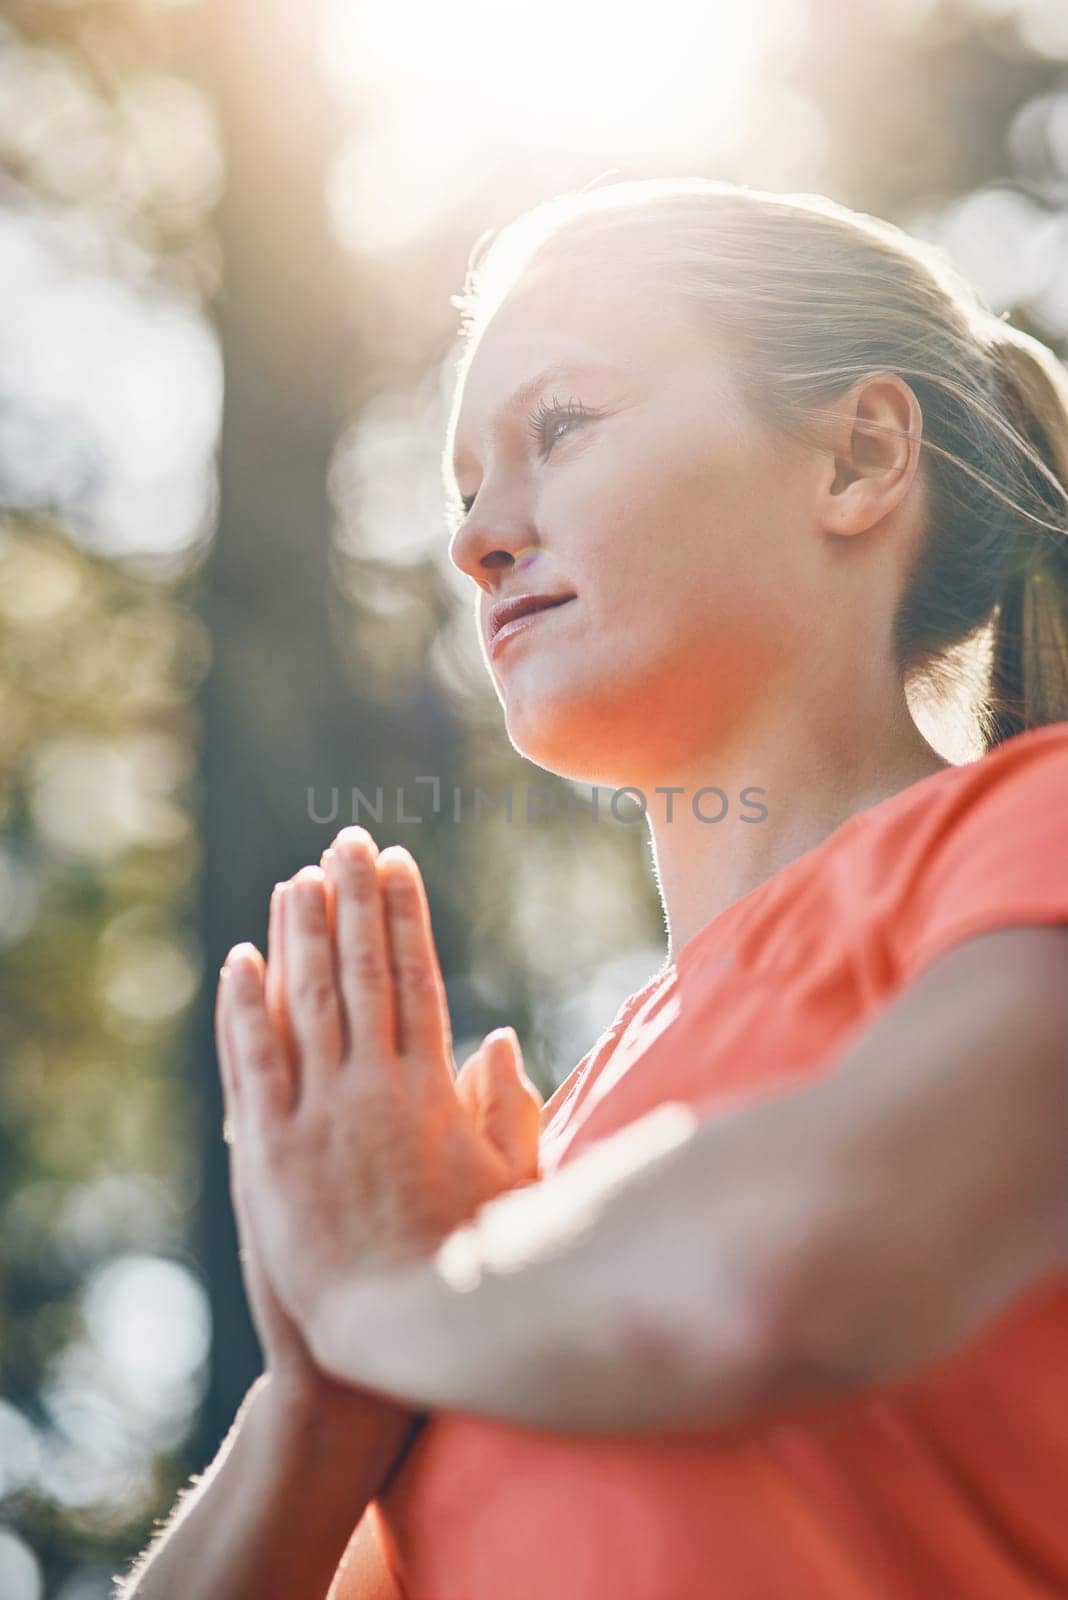 Hands, yoga and meditation with woman, praying with fitness outdoor and wellness, spiritual and low angle. Sunshine, female person meditate and zen with exercise, healing and mindfulness with prayer.